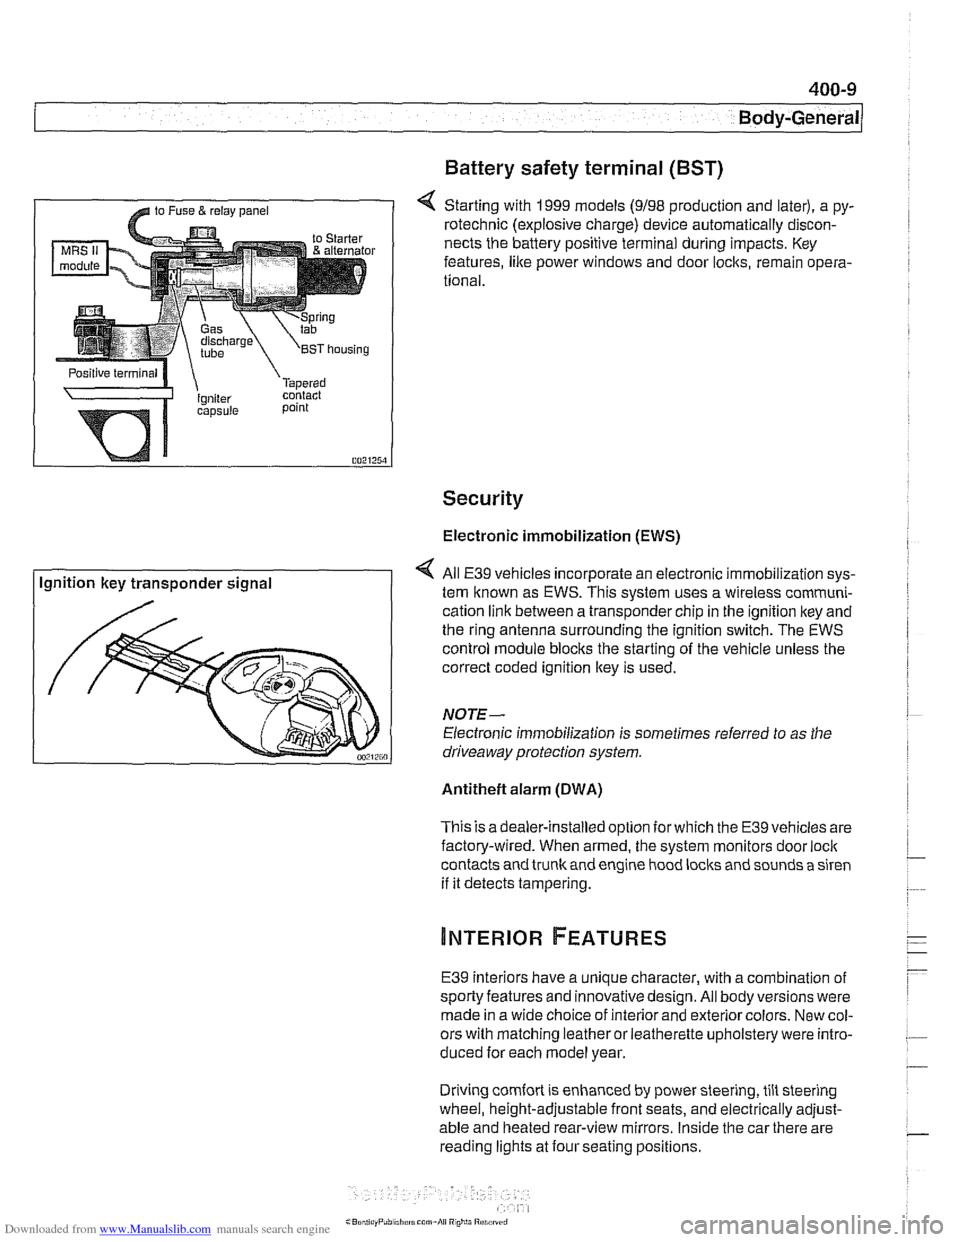 BMW 525i 2001 E39 Workshop Manual Downloaded from www.Manualslib.com manuals search engine 
400-9 
Body-General 
Battery  safety terminal 
(BST) 
4 Starting  with 1999 models (9198 production  and later), a py- 
rotechnic  (explosive 